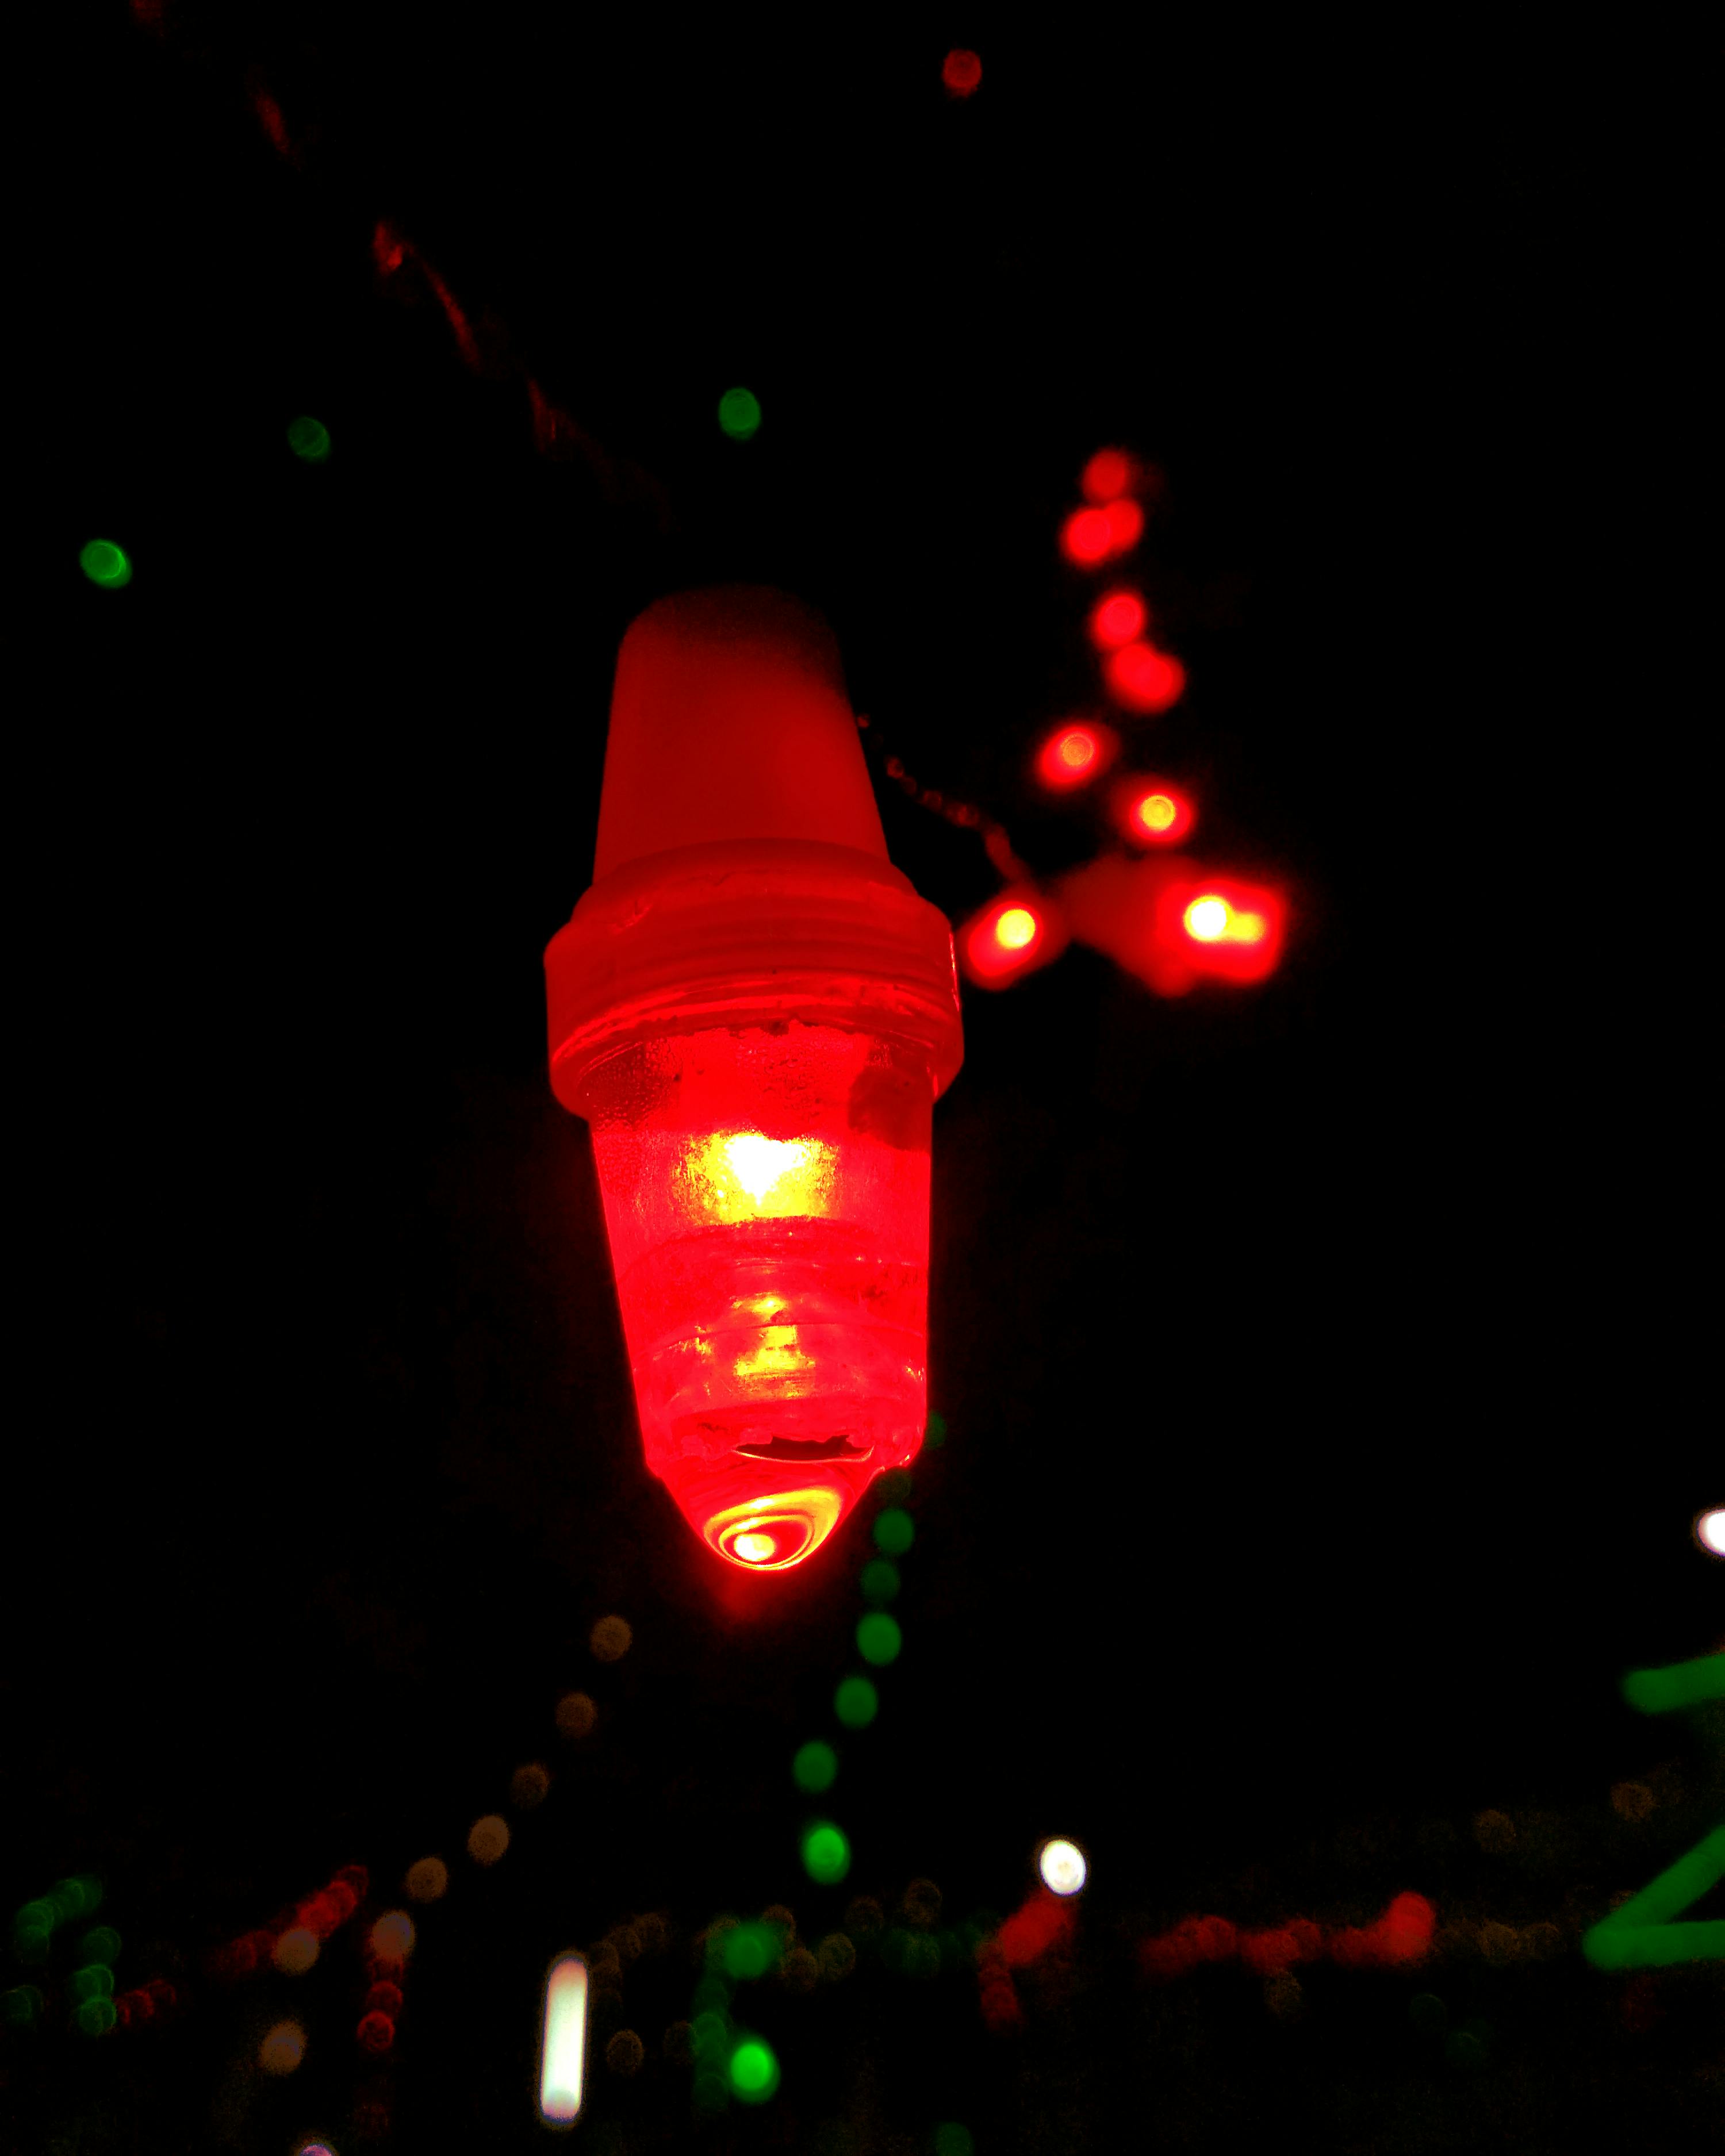 Free stock photo of lights, red bulb